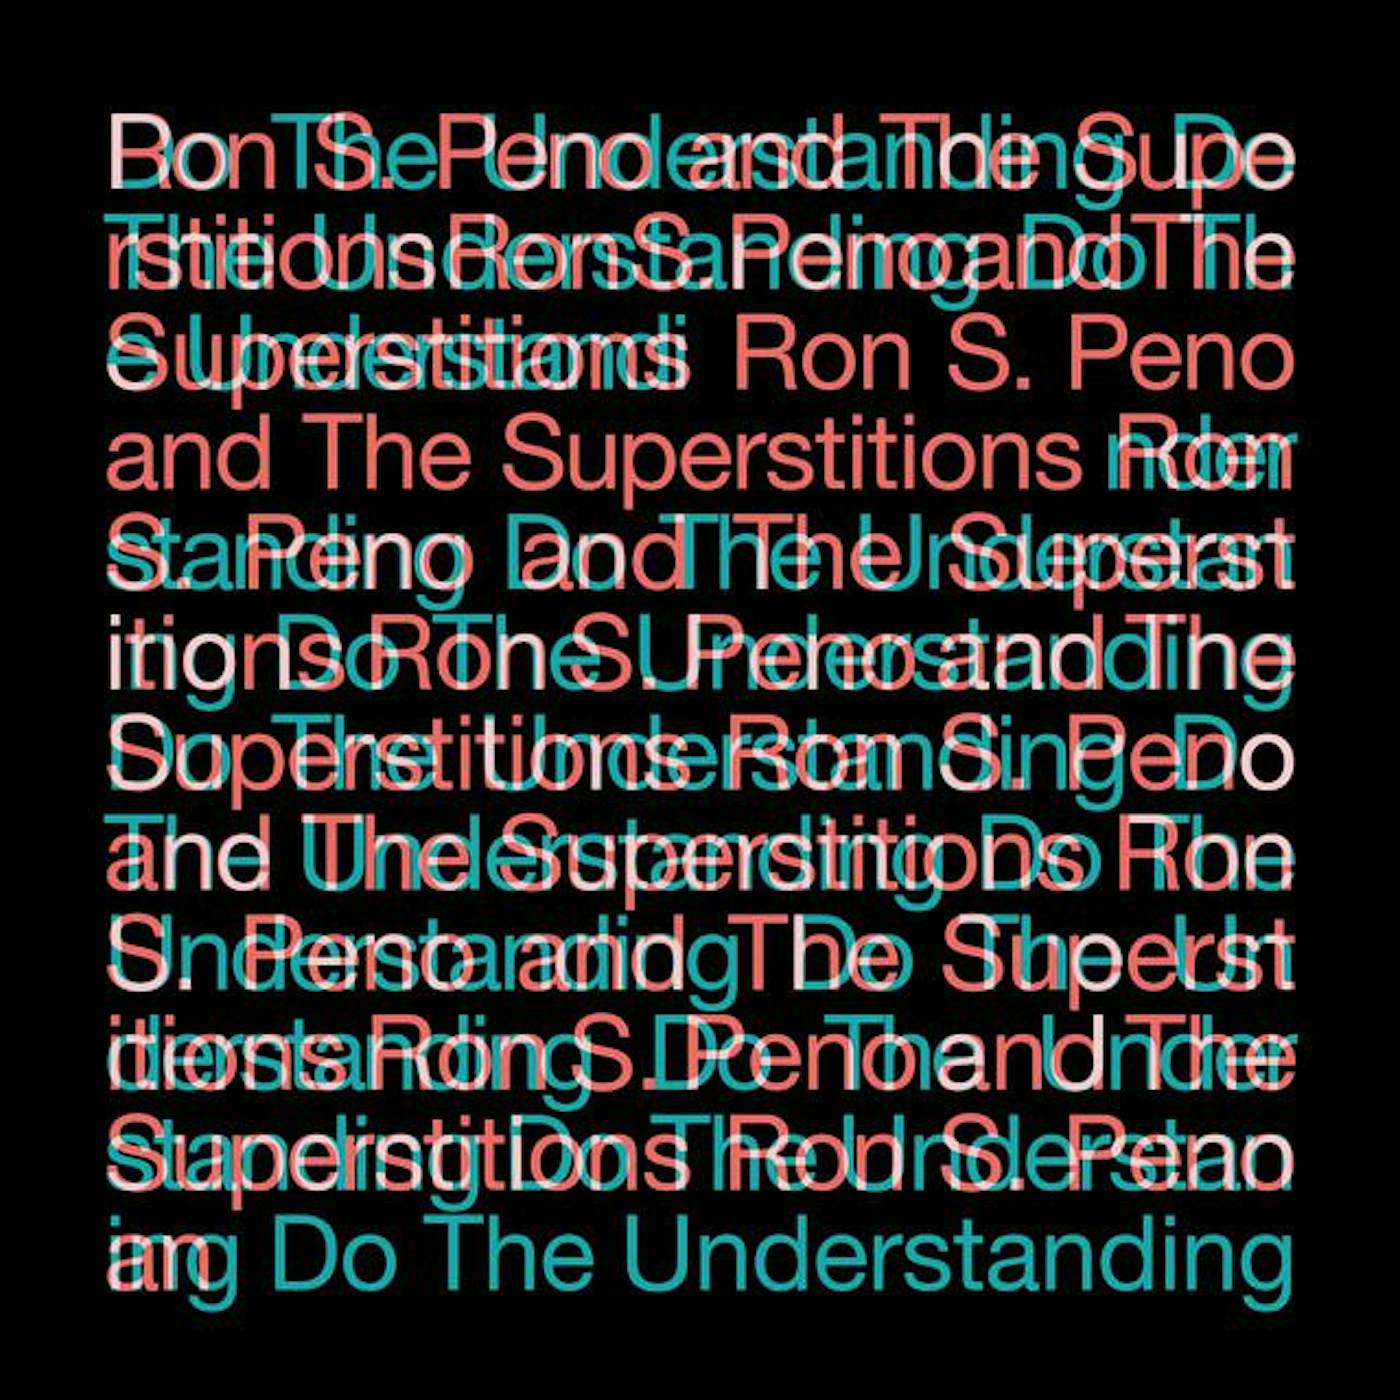 Ron S. Peno and The Superstitions